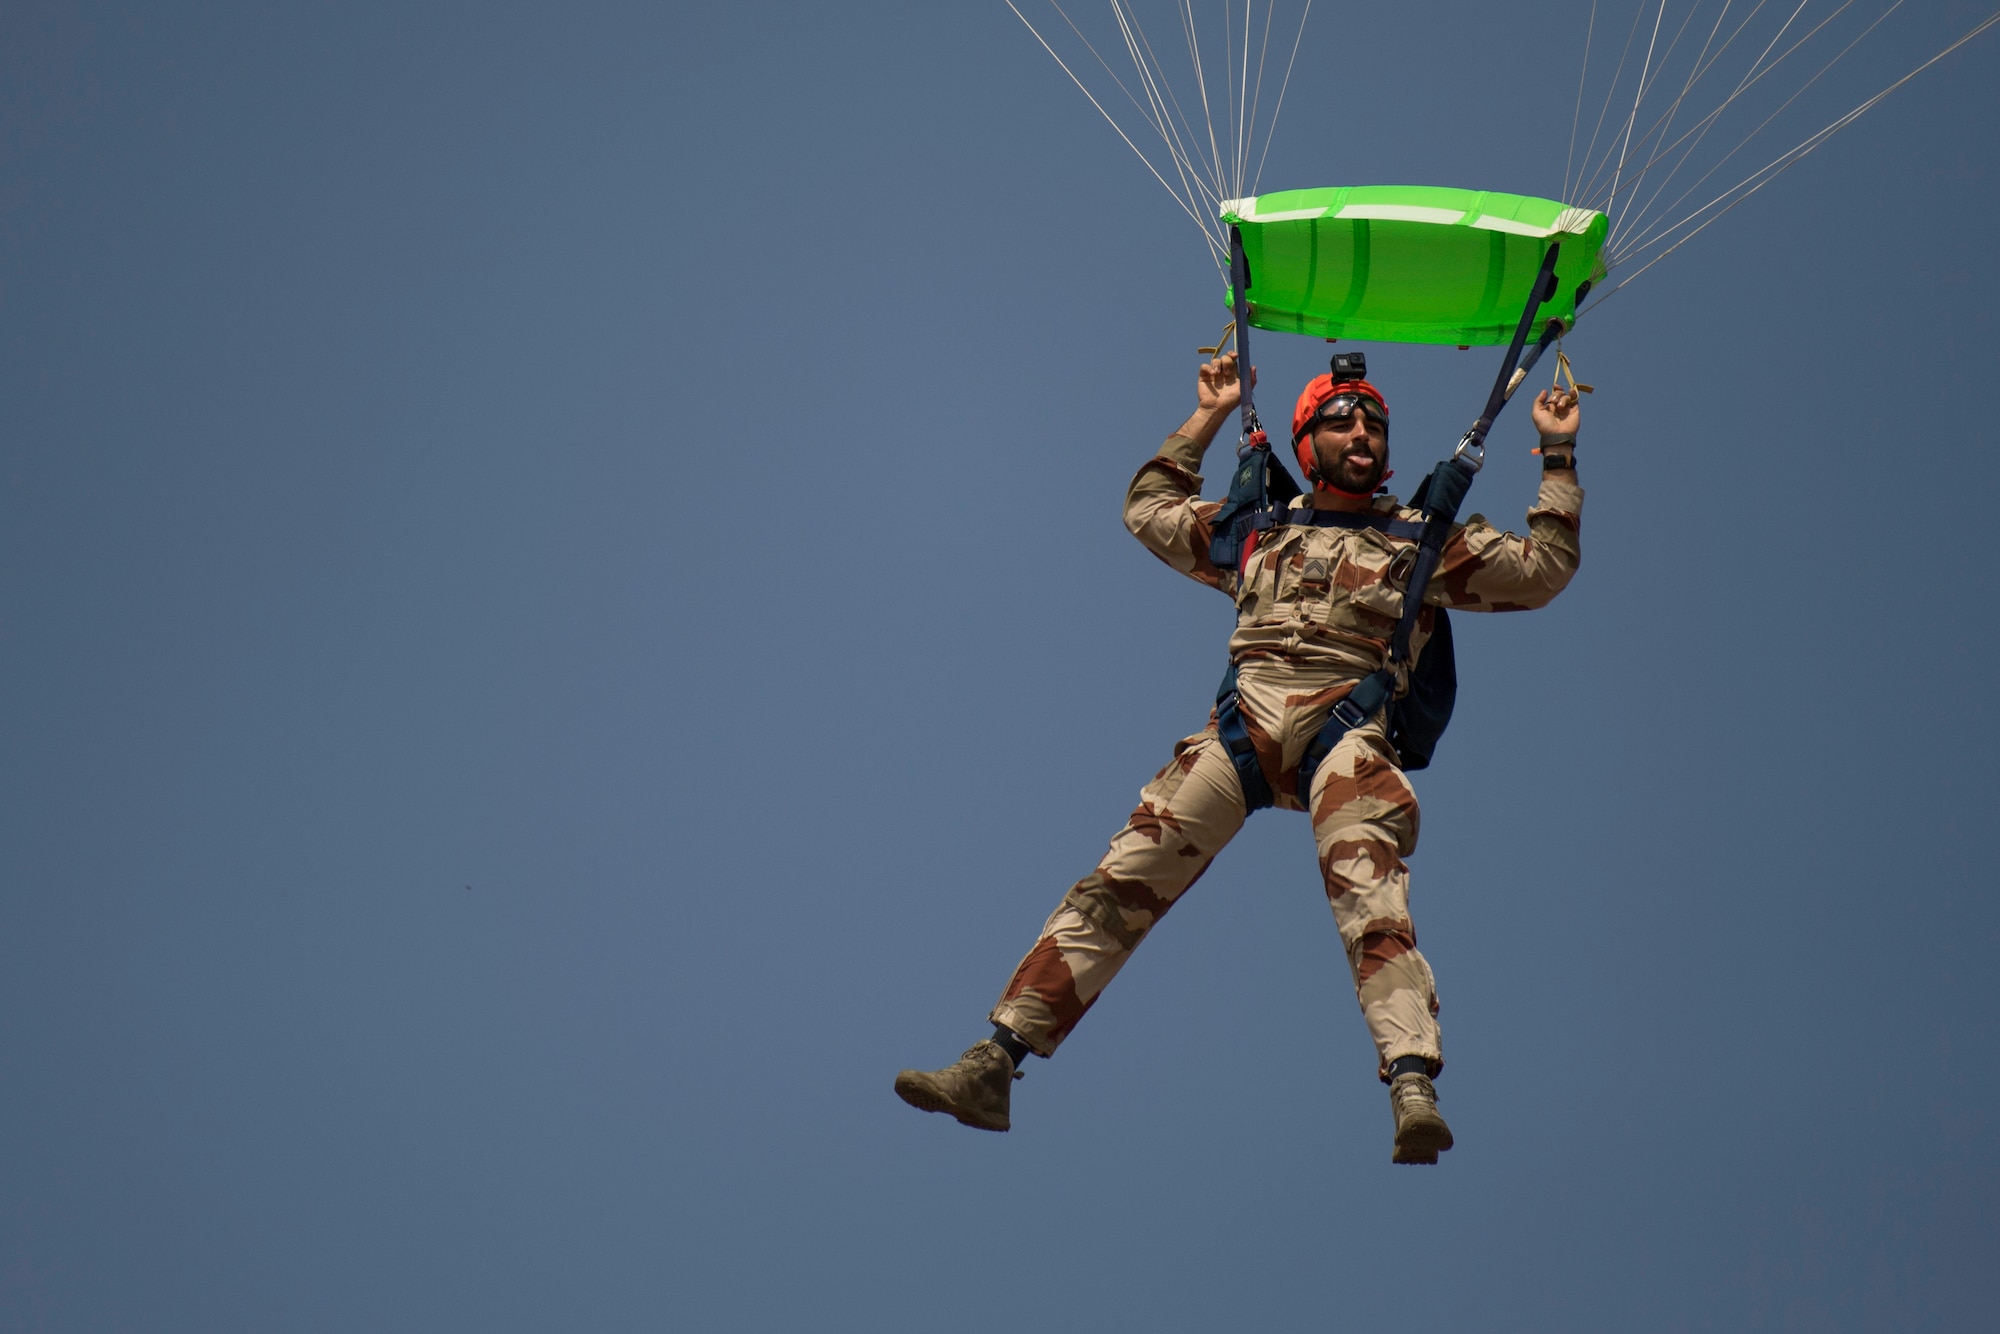 The 82nd Expeditionary Rescue Squadron performed free fall jumps alongside the French to commemorate the 75th Anniversary of D-Day. The U.S. and French forces perform these exercises together to increase partner capacity and strengthen interoperability. (U.S. Air Force photo by Staff Sgt. Devin Boyer)